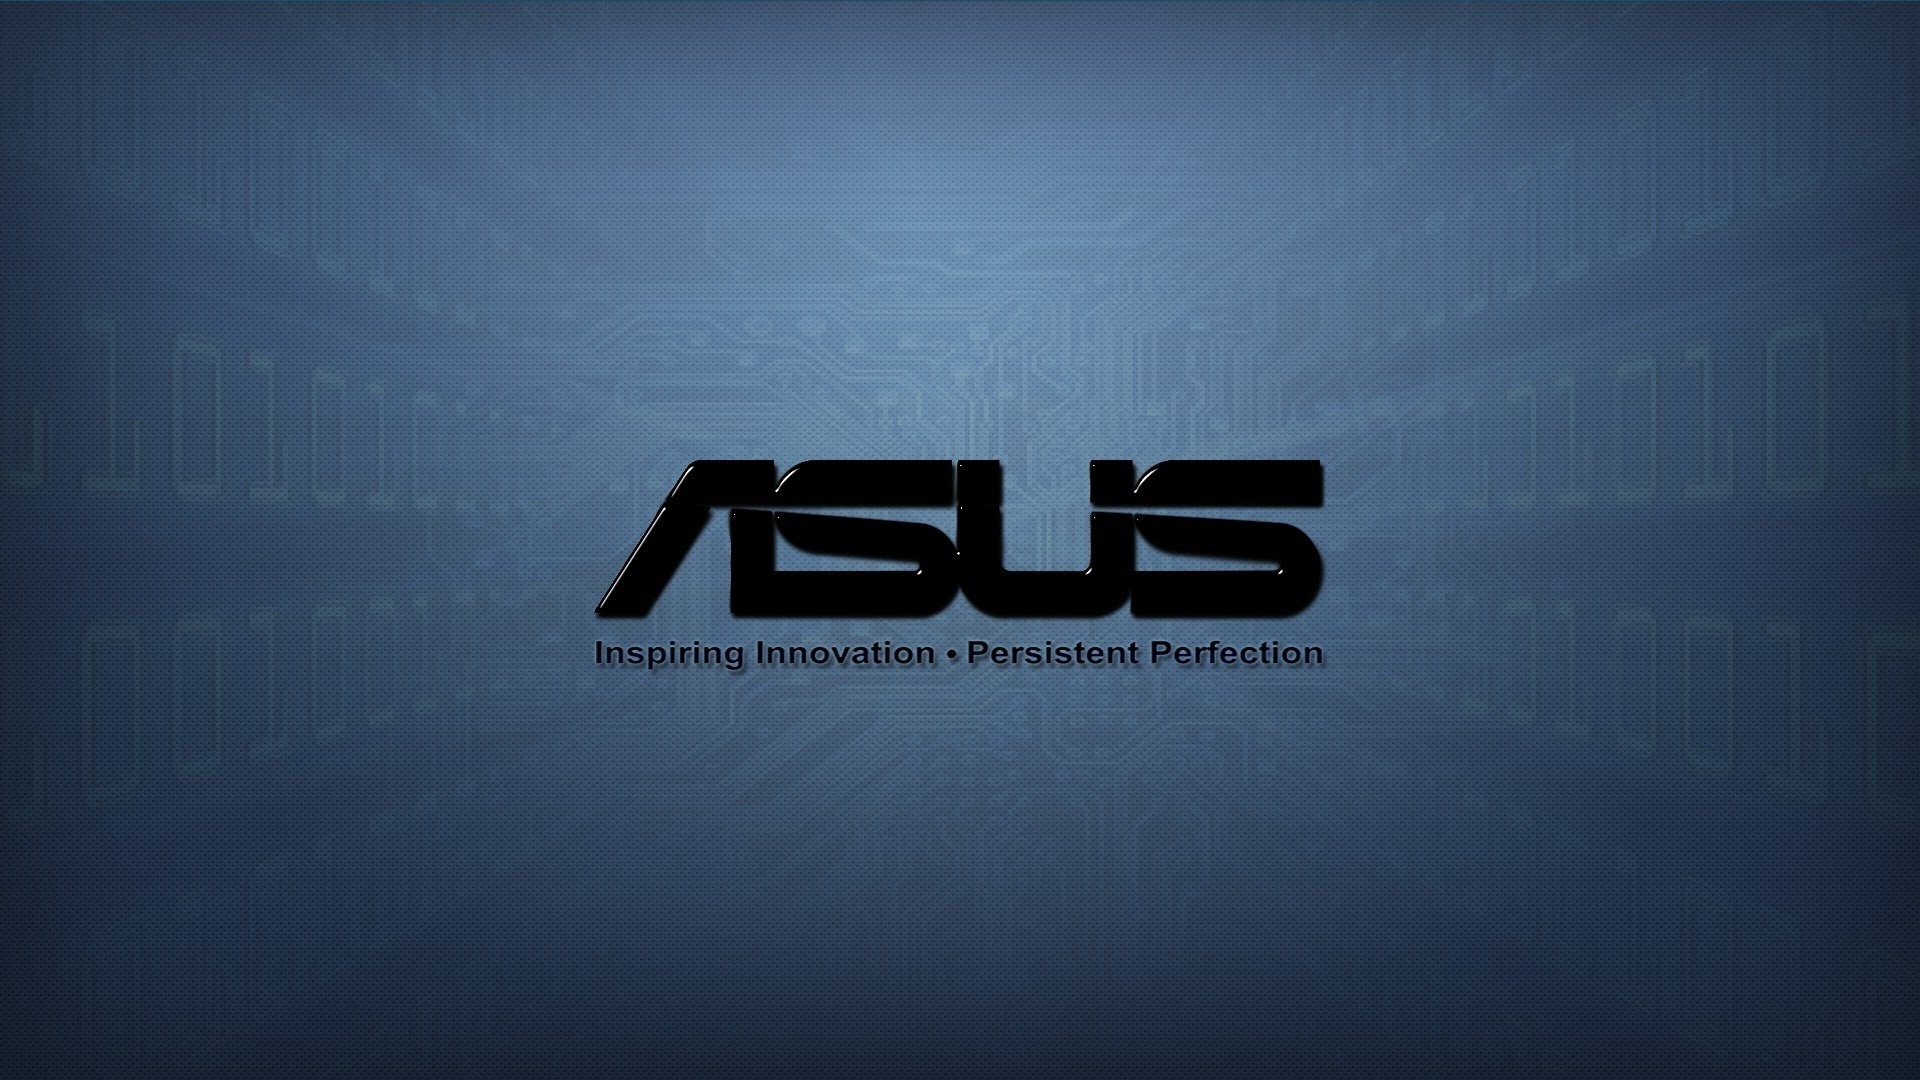 asus picture – Background hd, 469 kB – Colvin Young